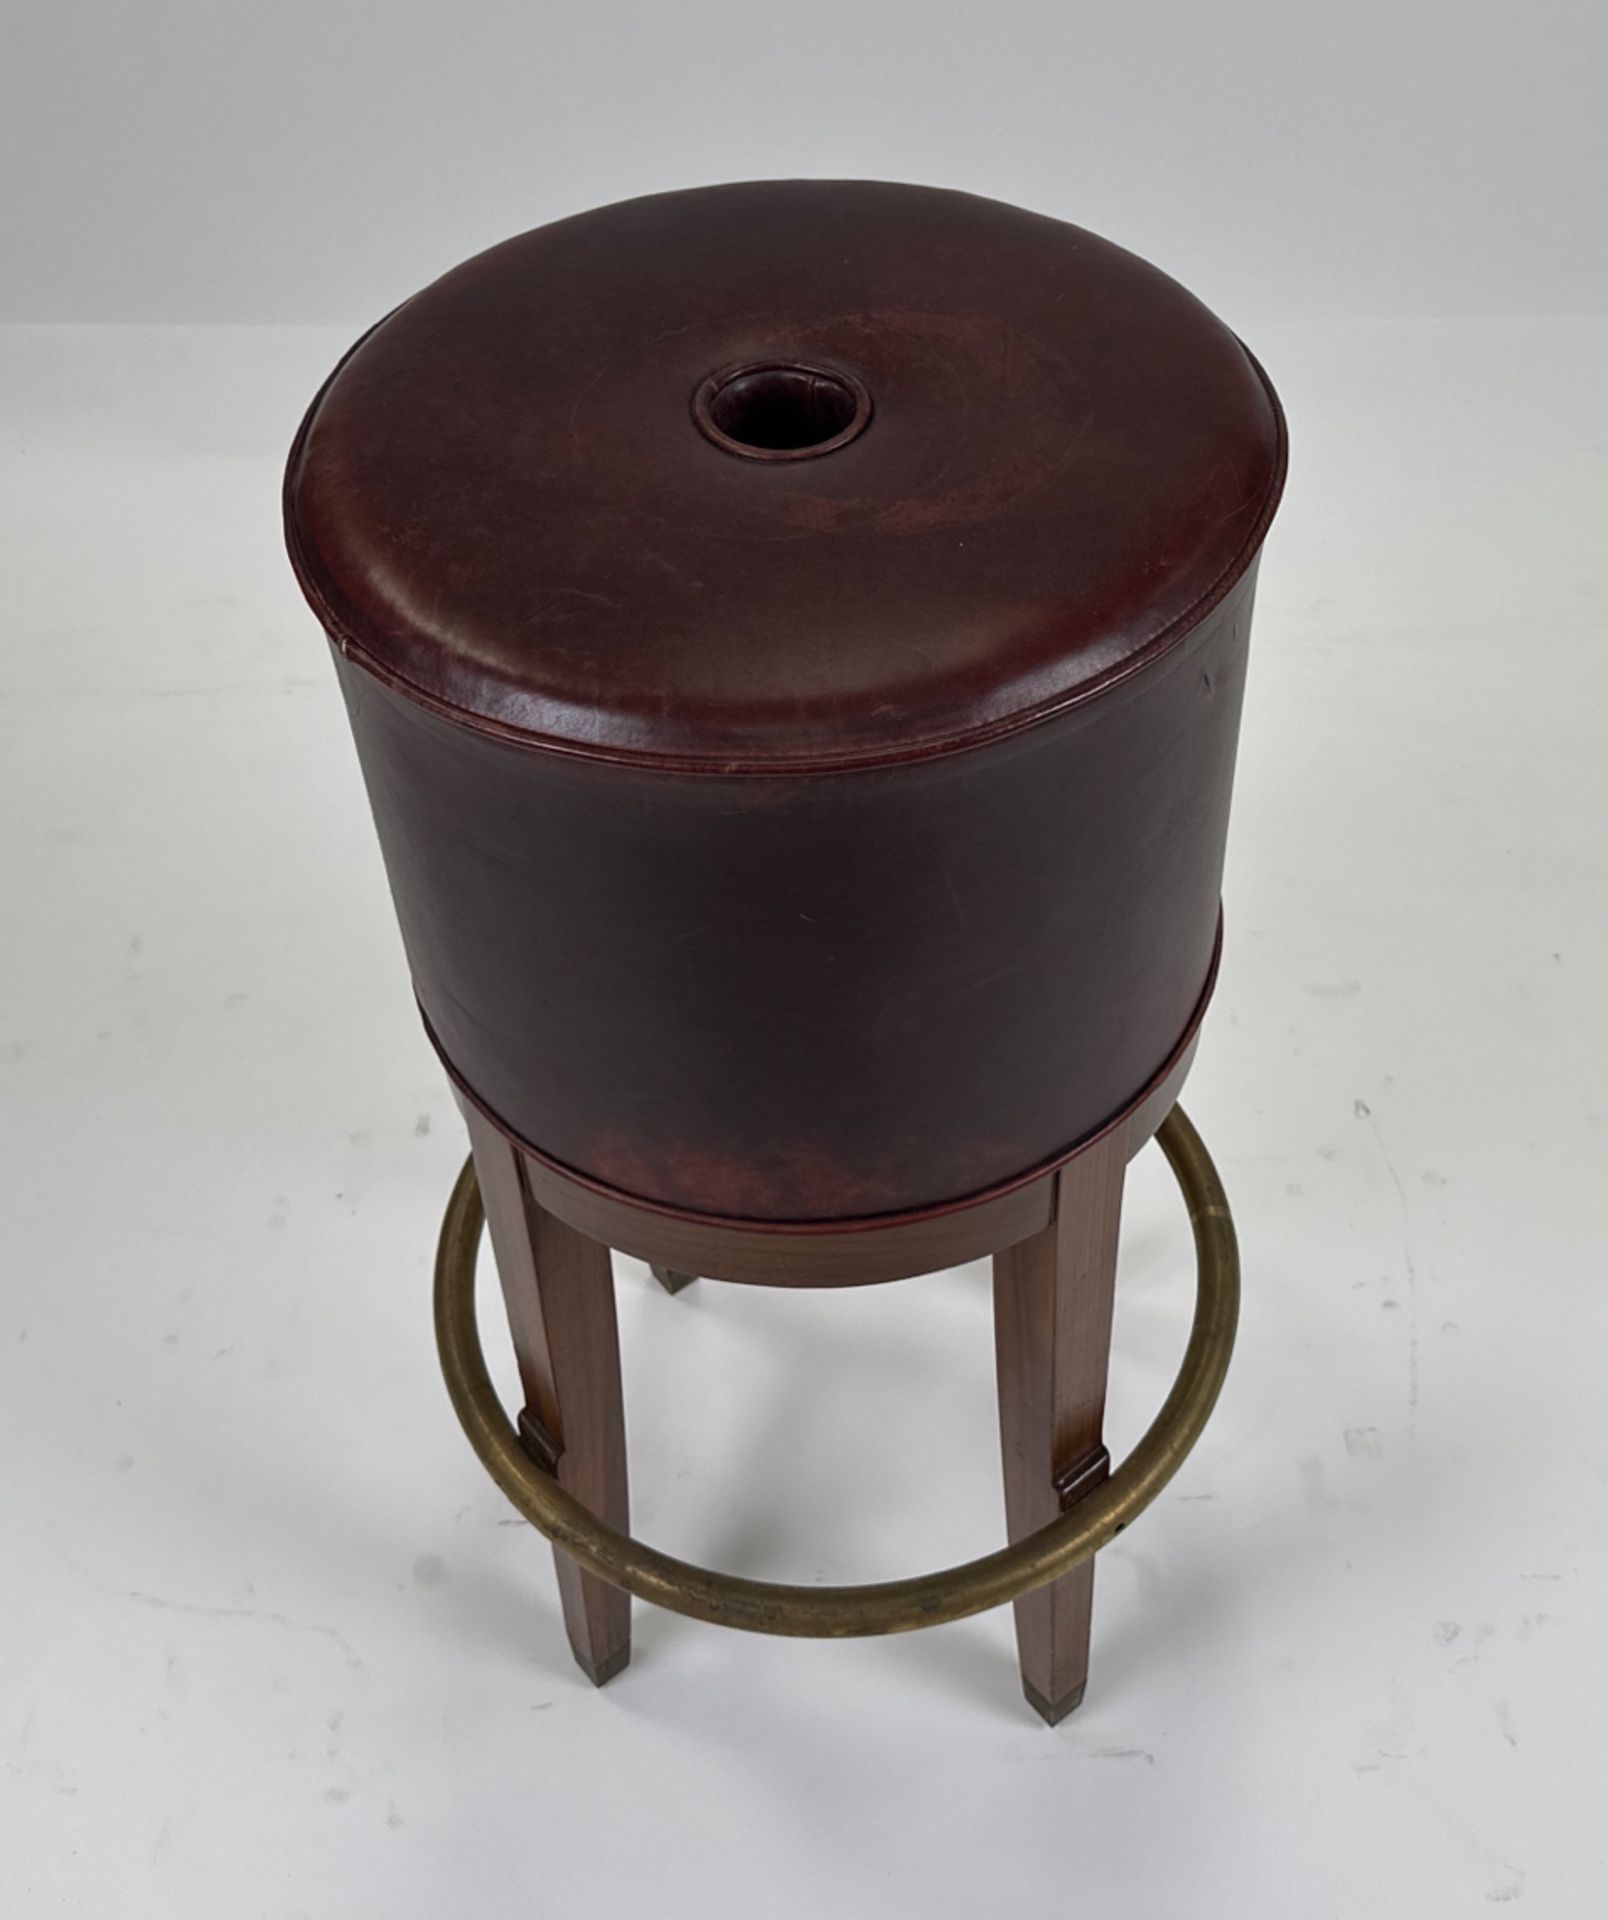 Leather & Brass Bar Stool - Image 2 of 6